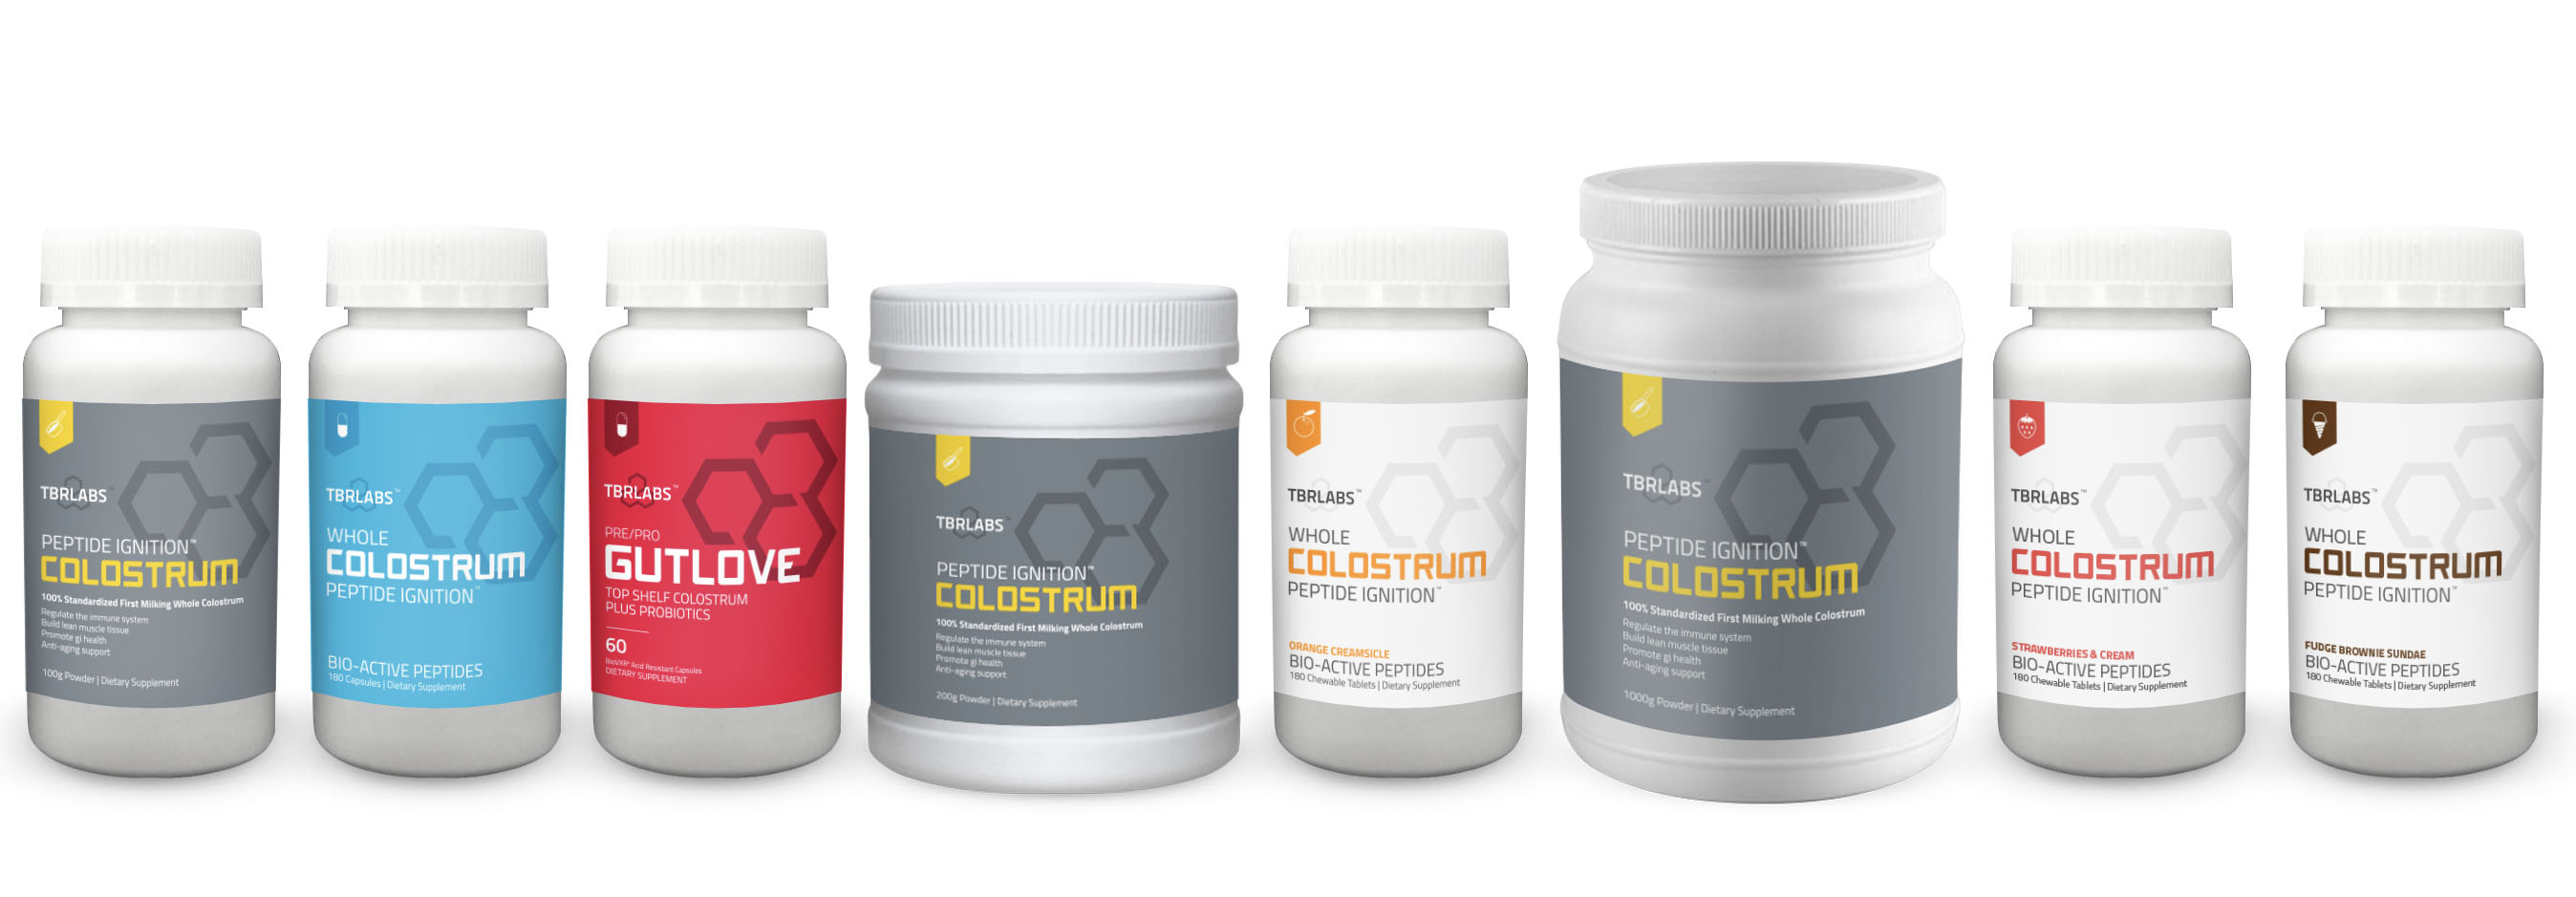 immune function components of colostrum